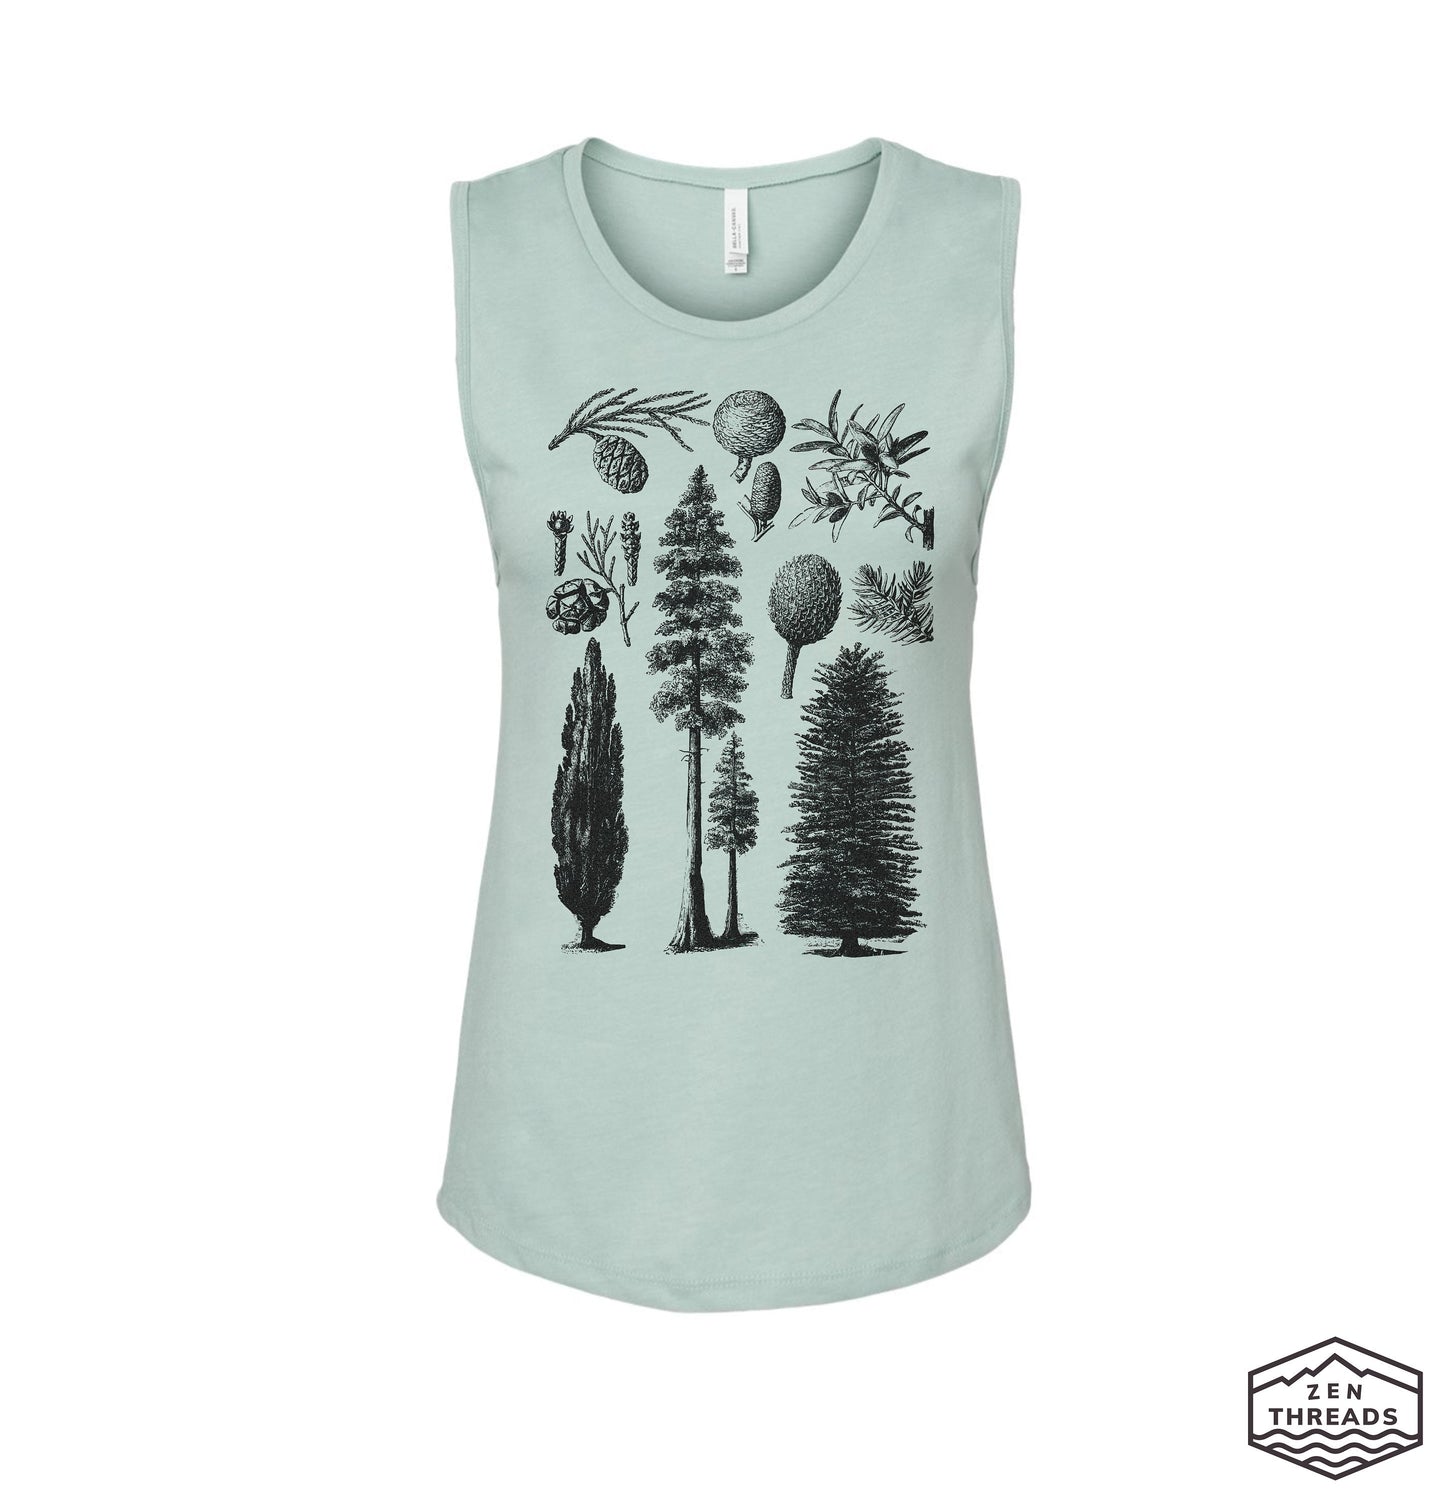 Womens PINES Muscle Tank workout fitness tee Pine Trees Nature Lover Hiking t-shirt redwoods forest camping outdoors yoga gym sleeveless top